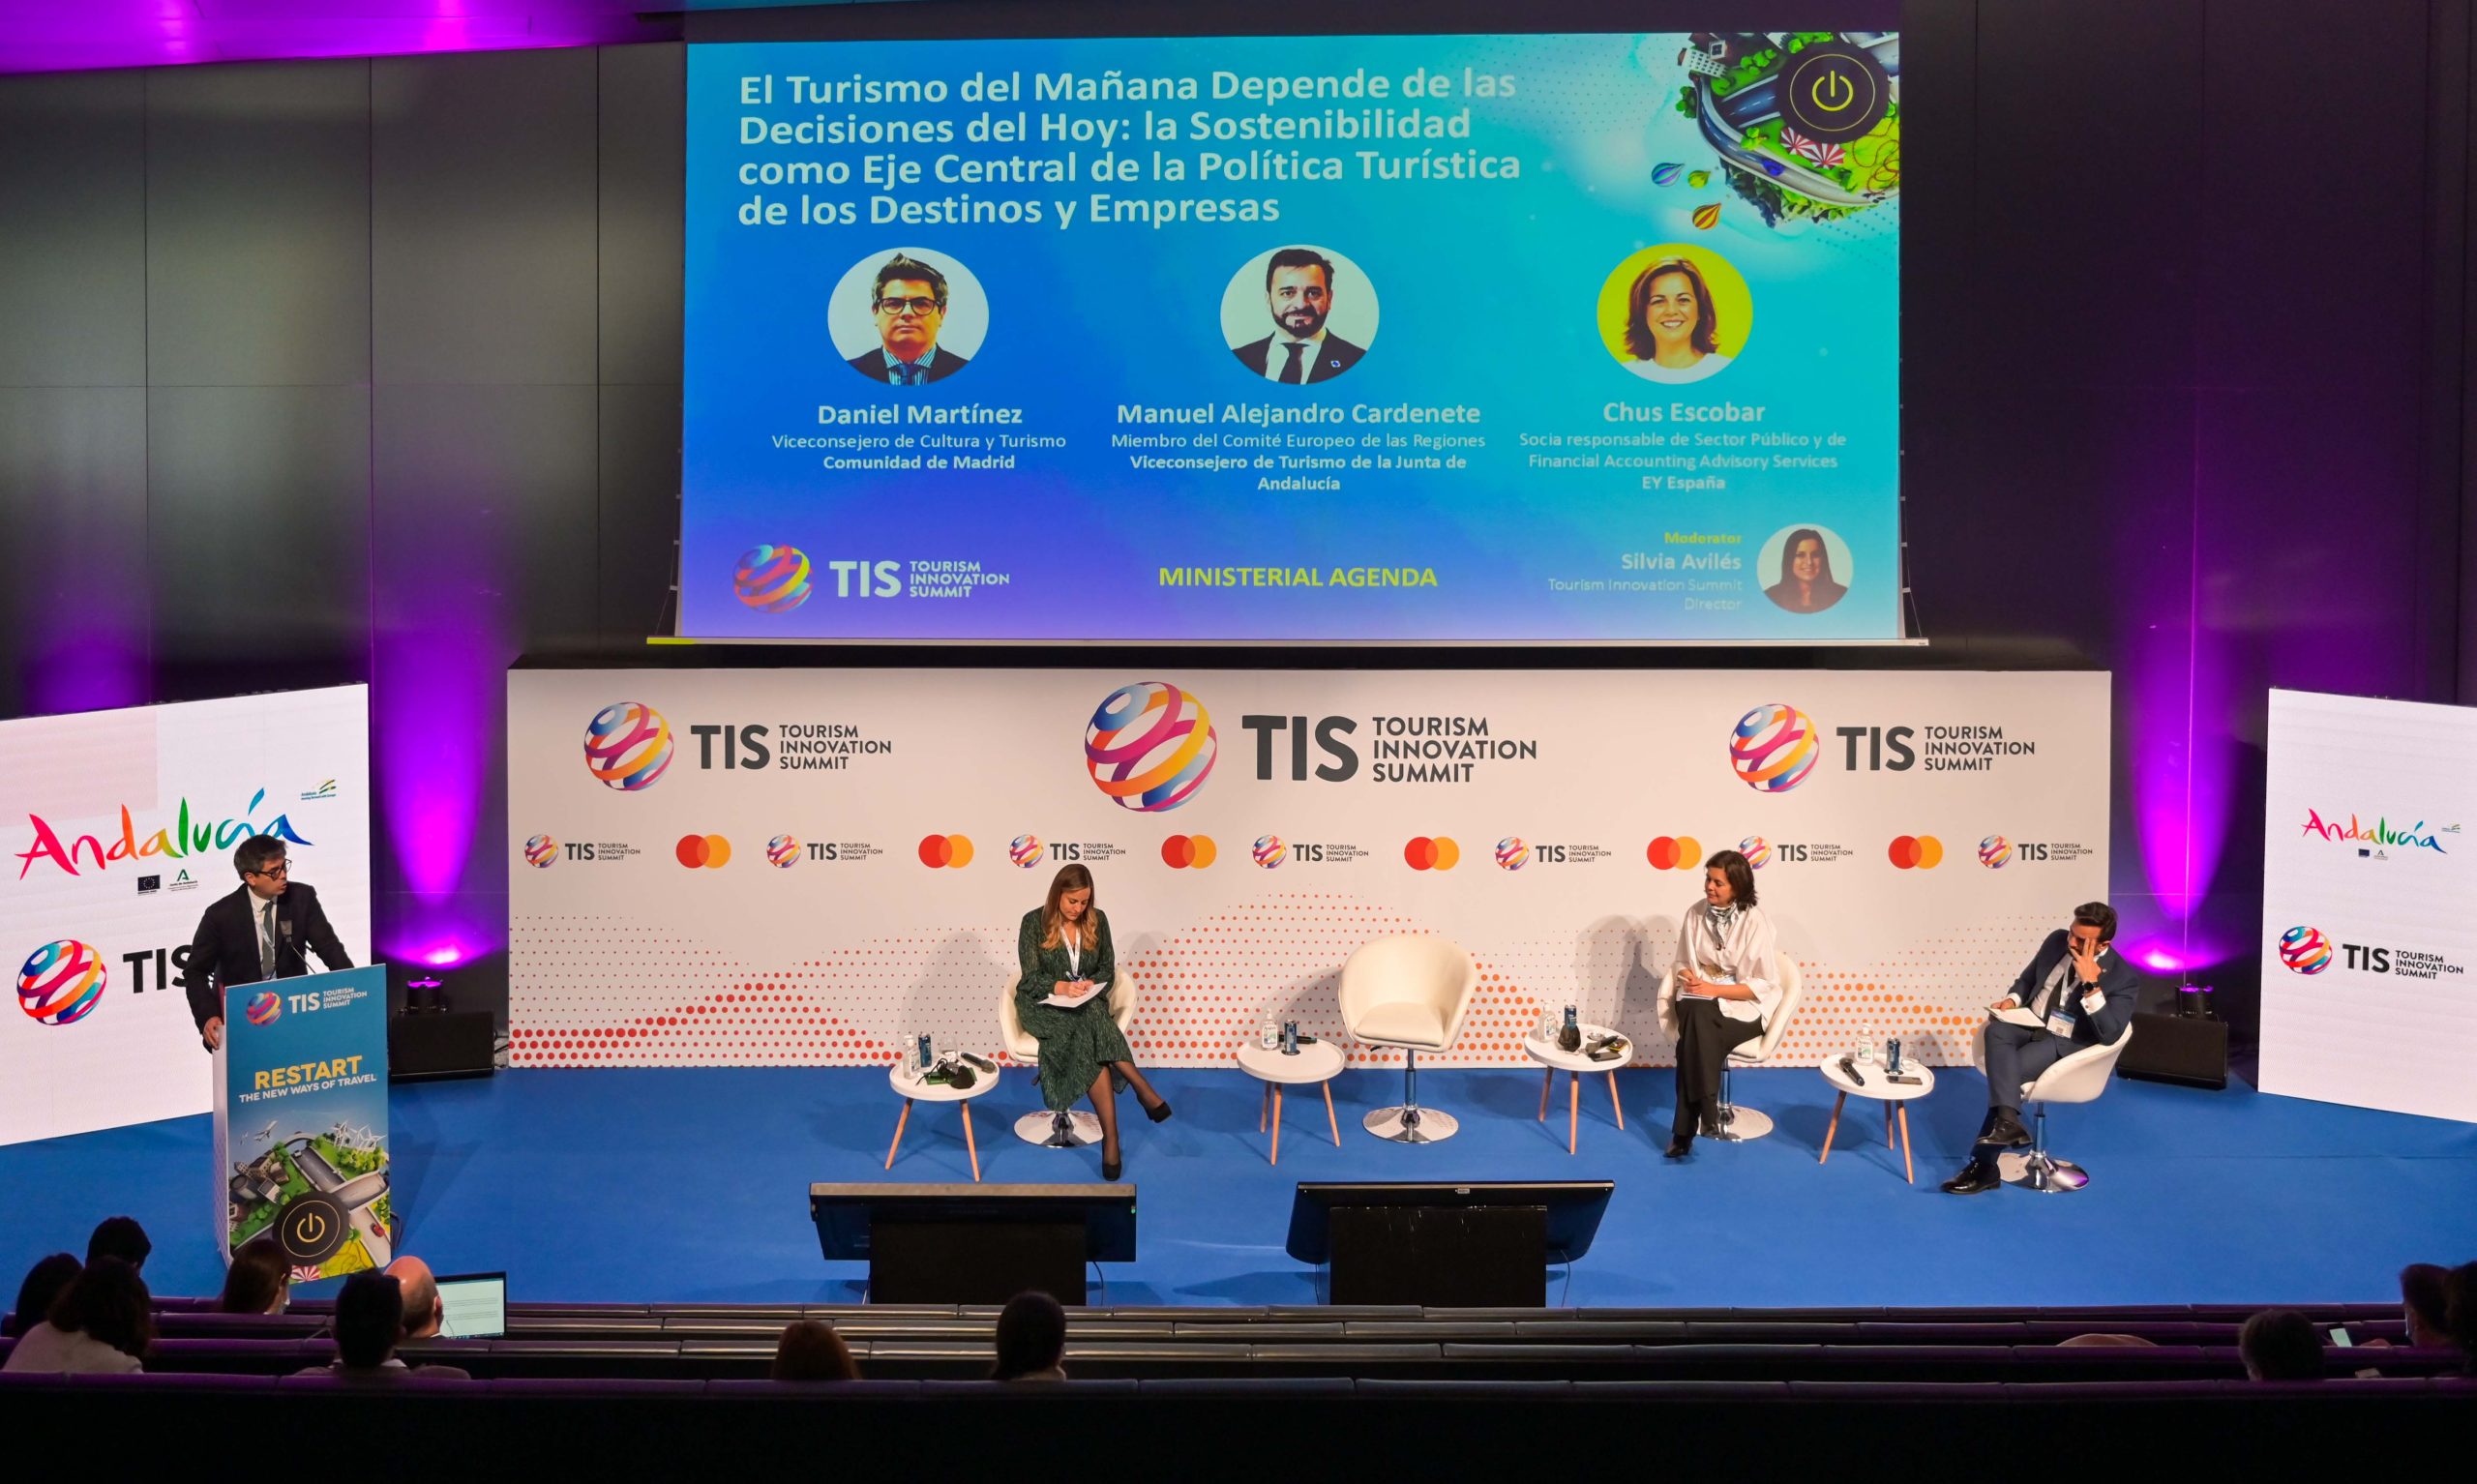 Berlin, Gothenburg, Amsterdam and Bologna will share the keys to sustainable tourism at TIS2022